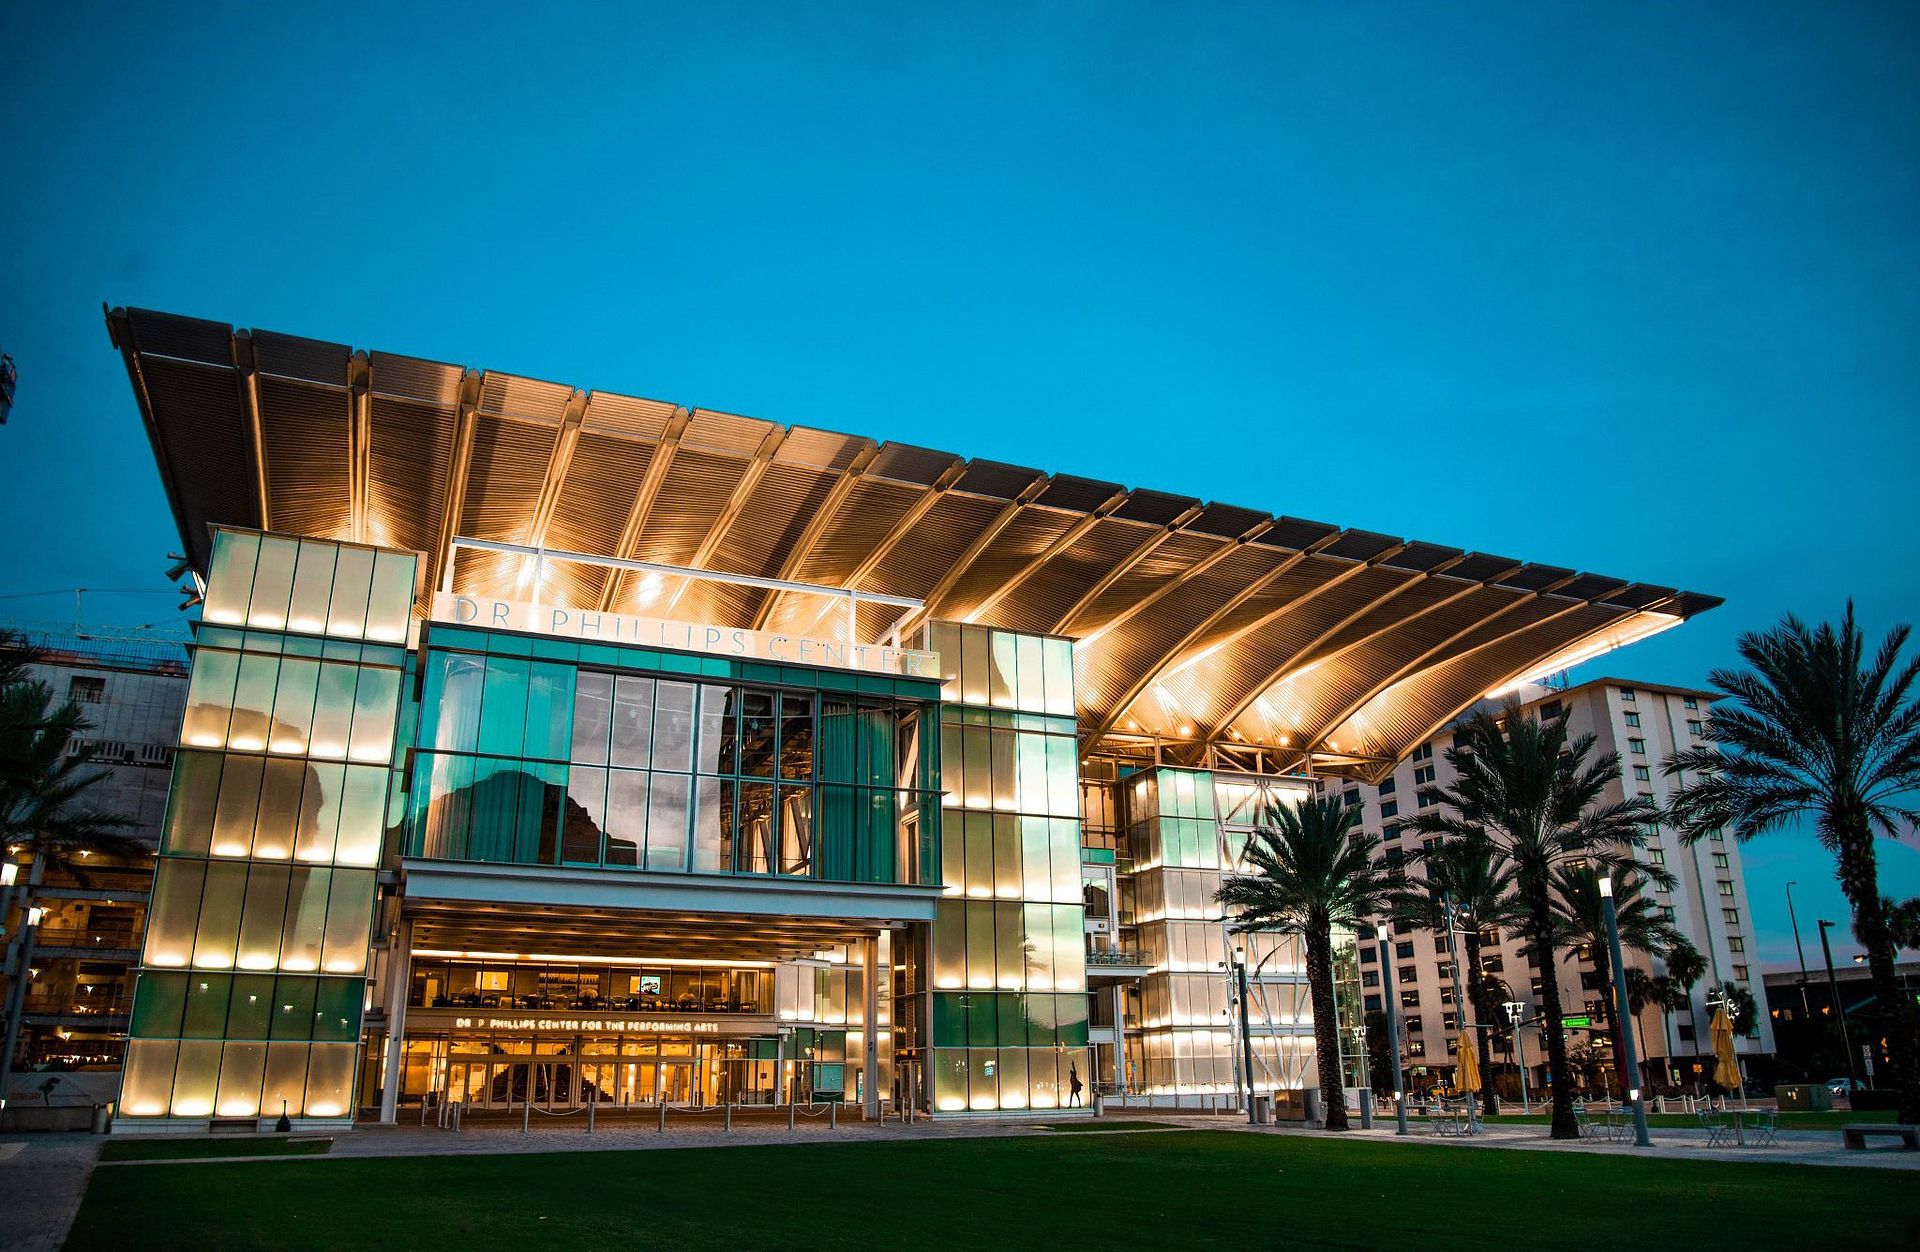 Dr Phillips Center For The Performing Arts Orlando Fl